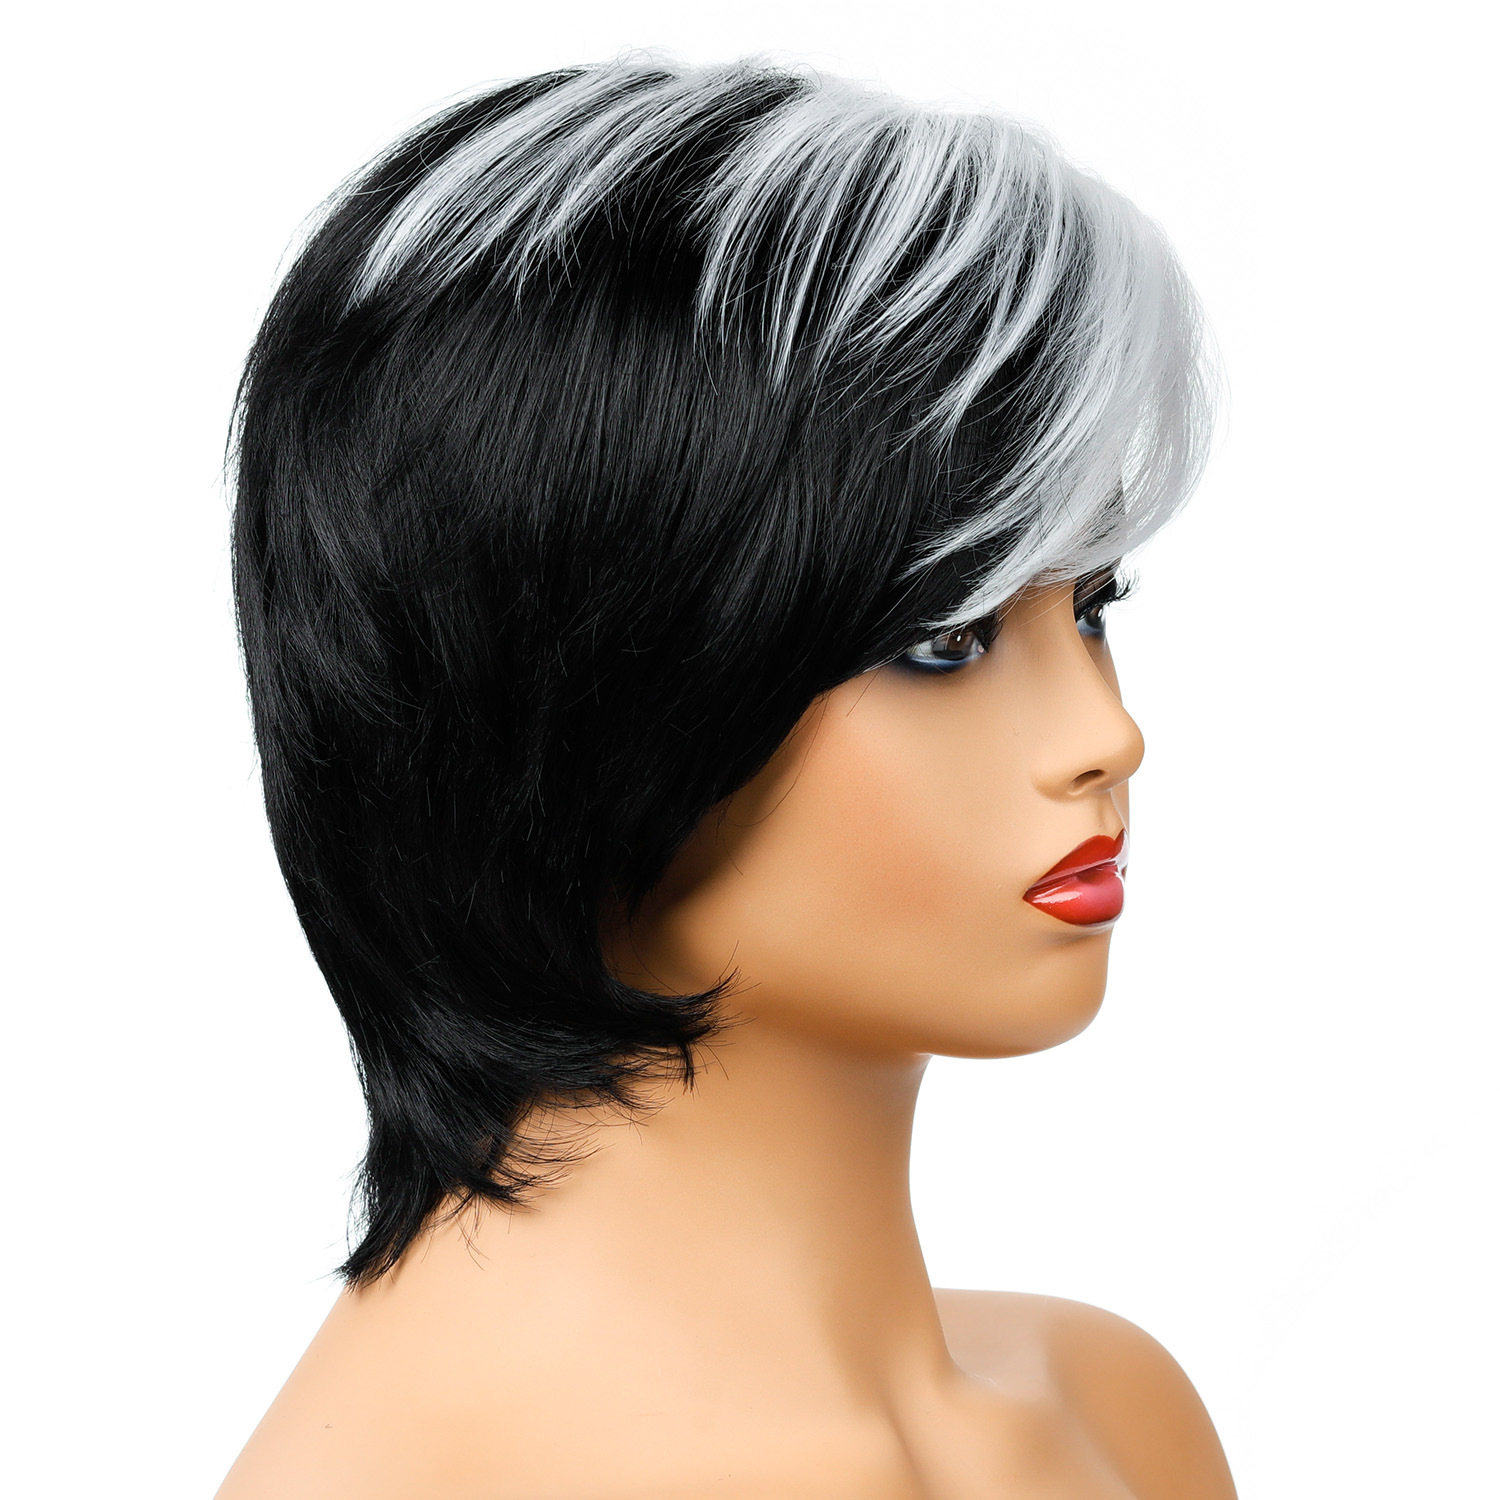 a synthetic wig featuring short black and white hair, a stylish option for women